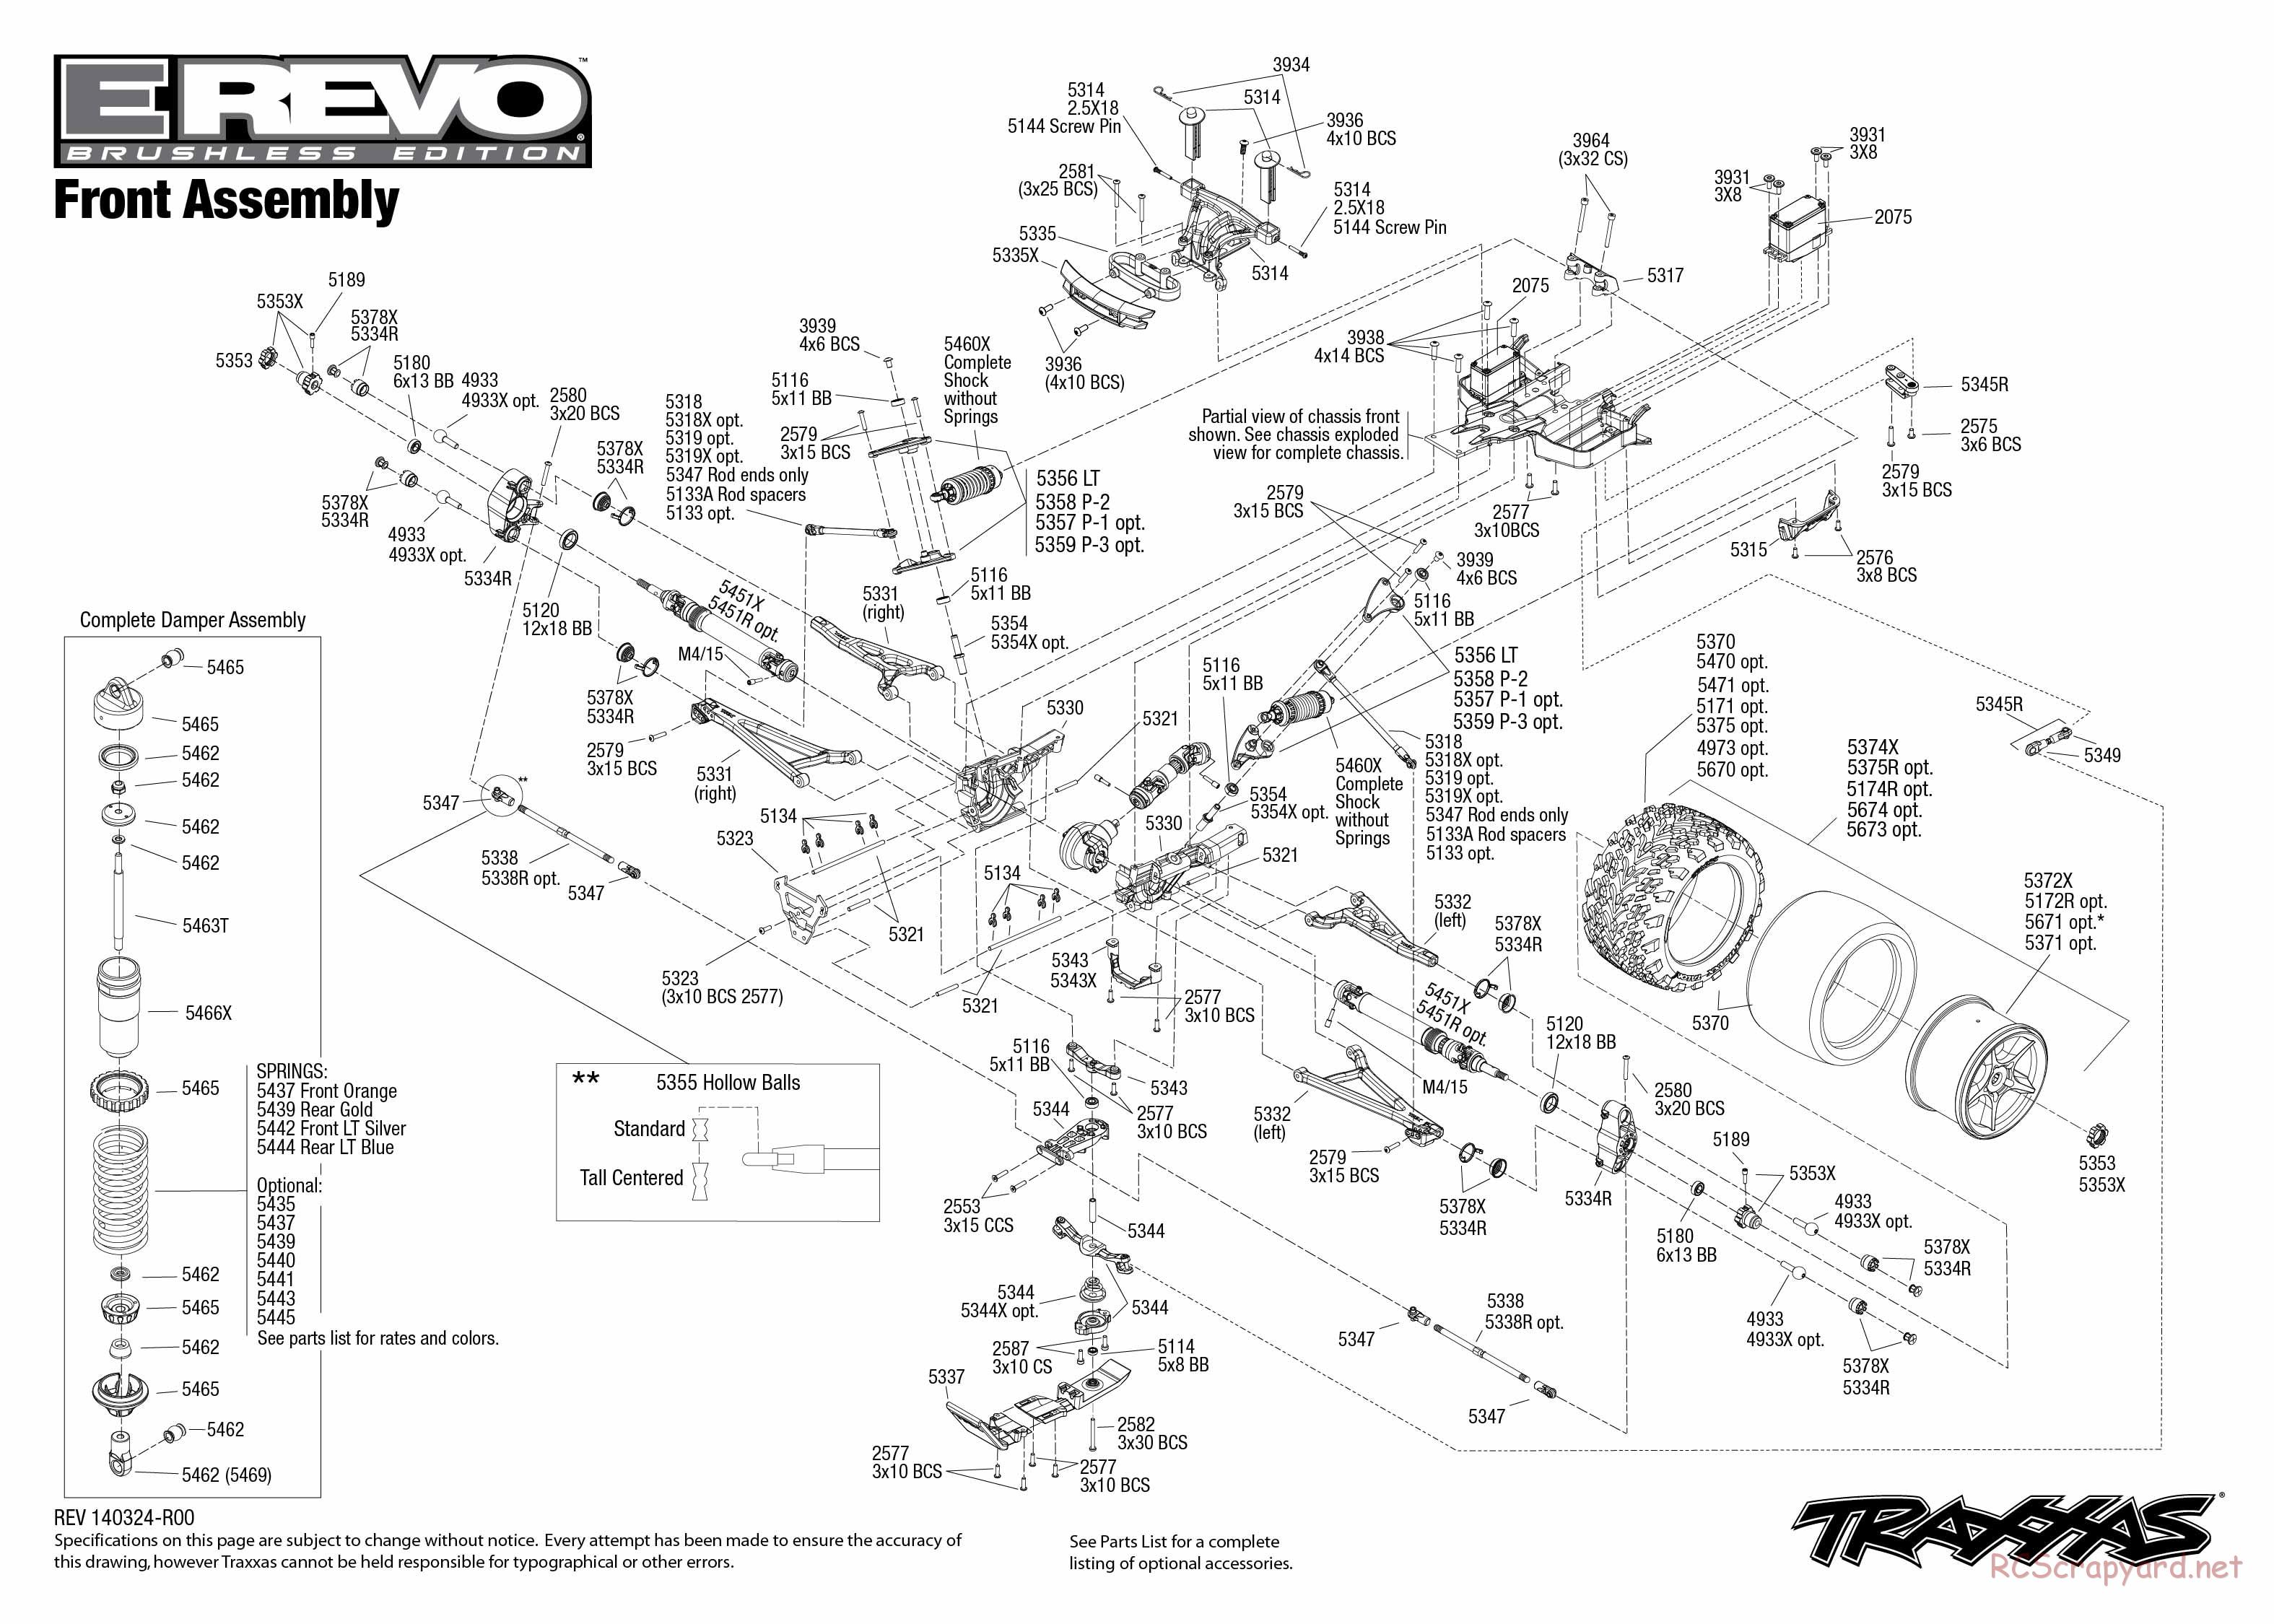 Traxxas - E-Revo Brushless (2014) - Exploded Views - Page 3